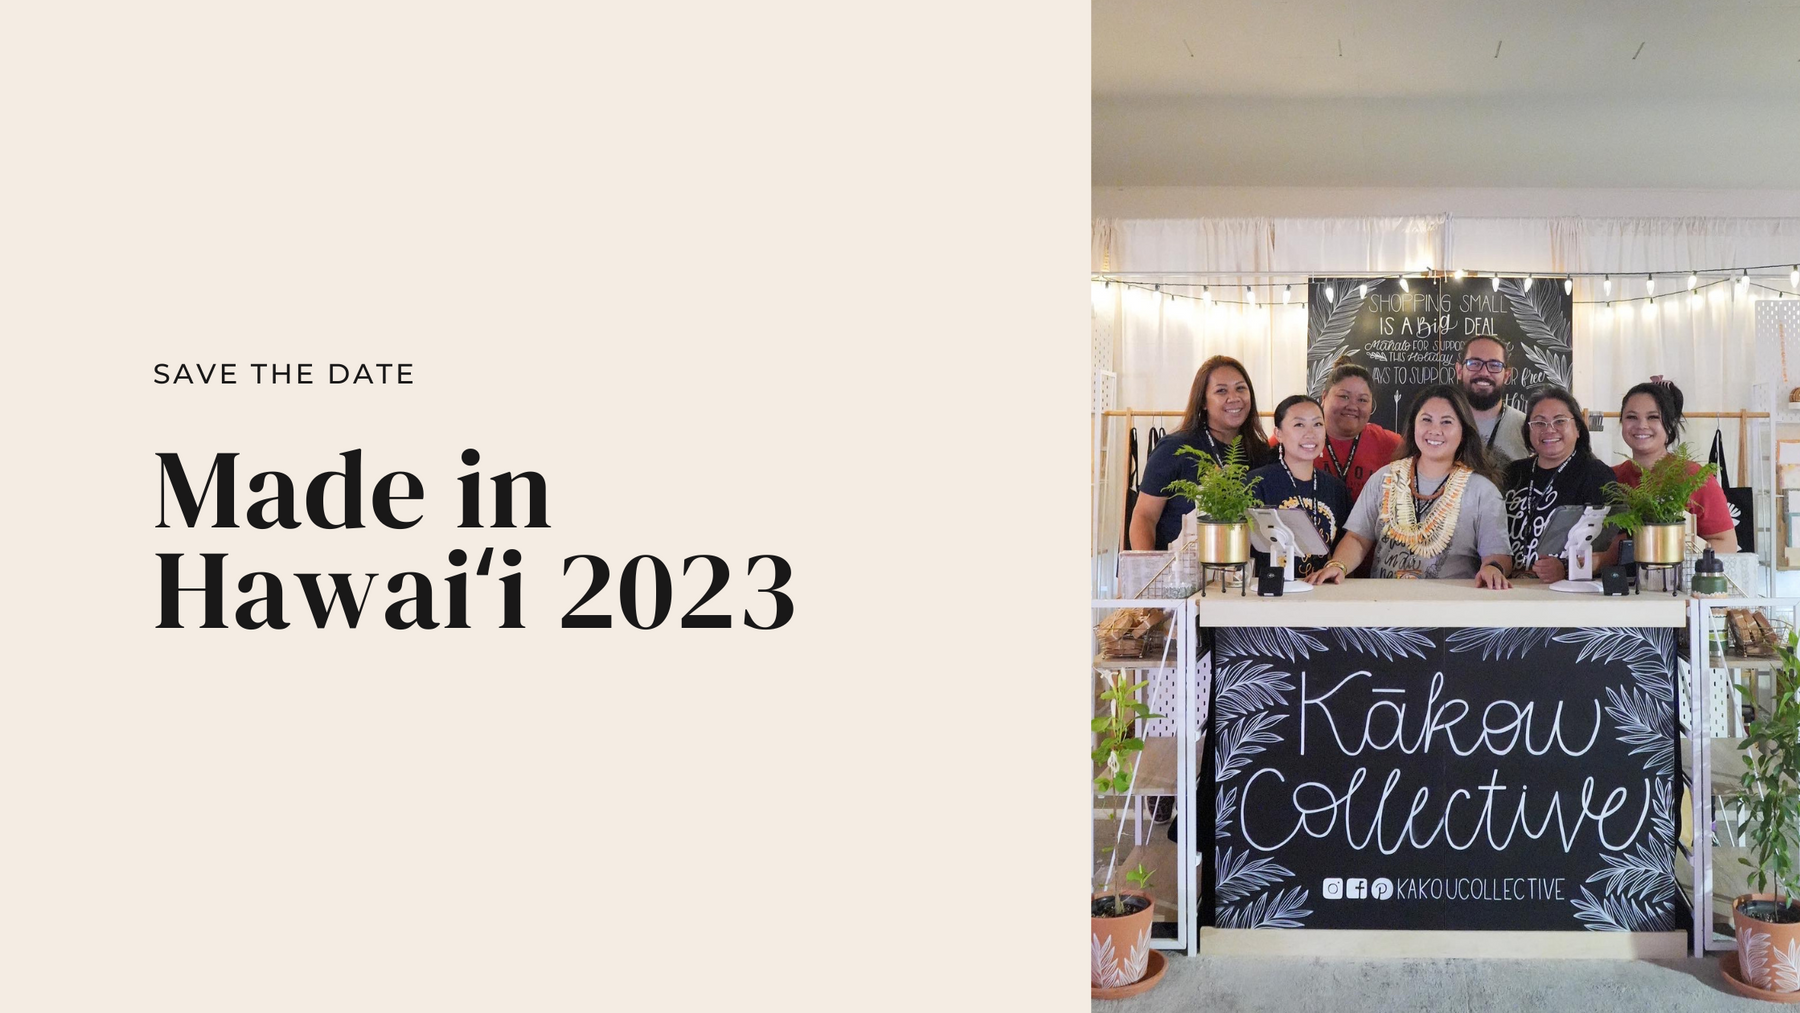 Save the date: Made in Hawaii 2023